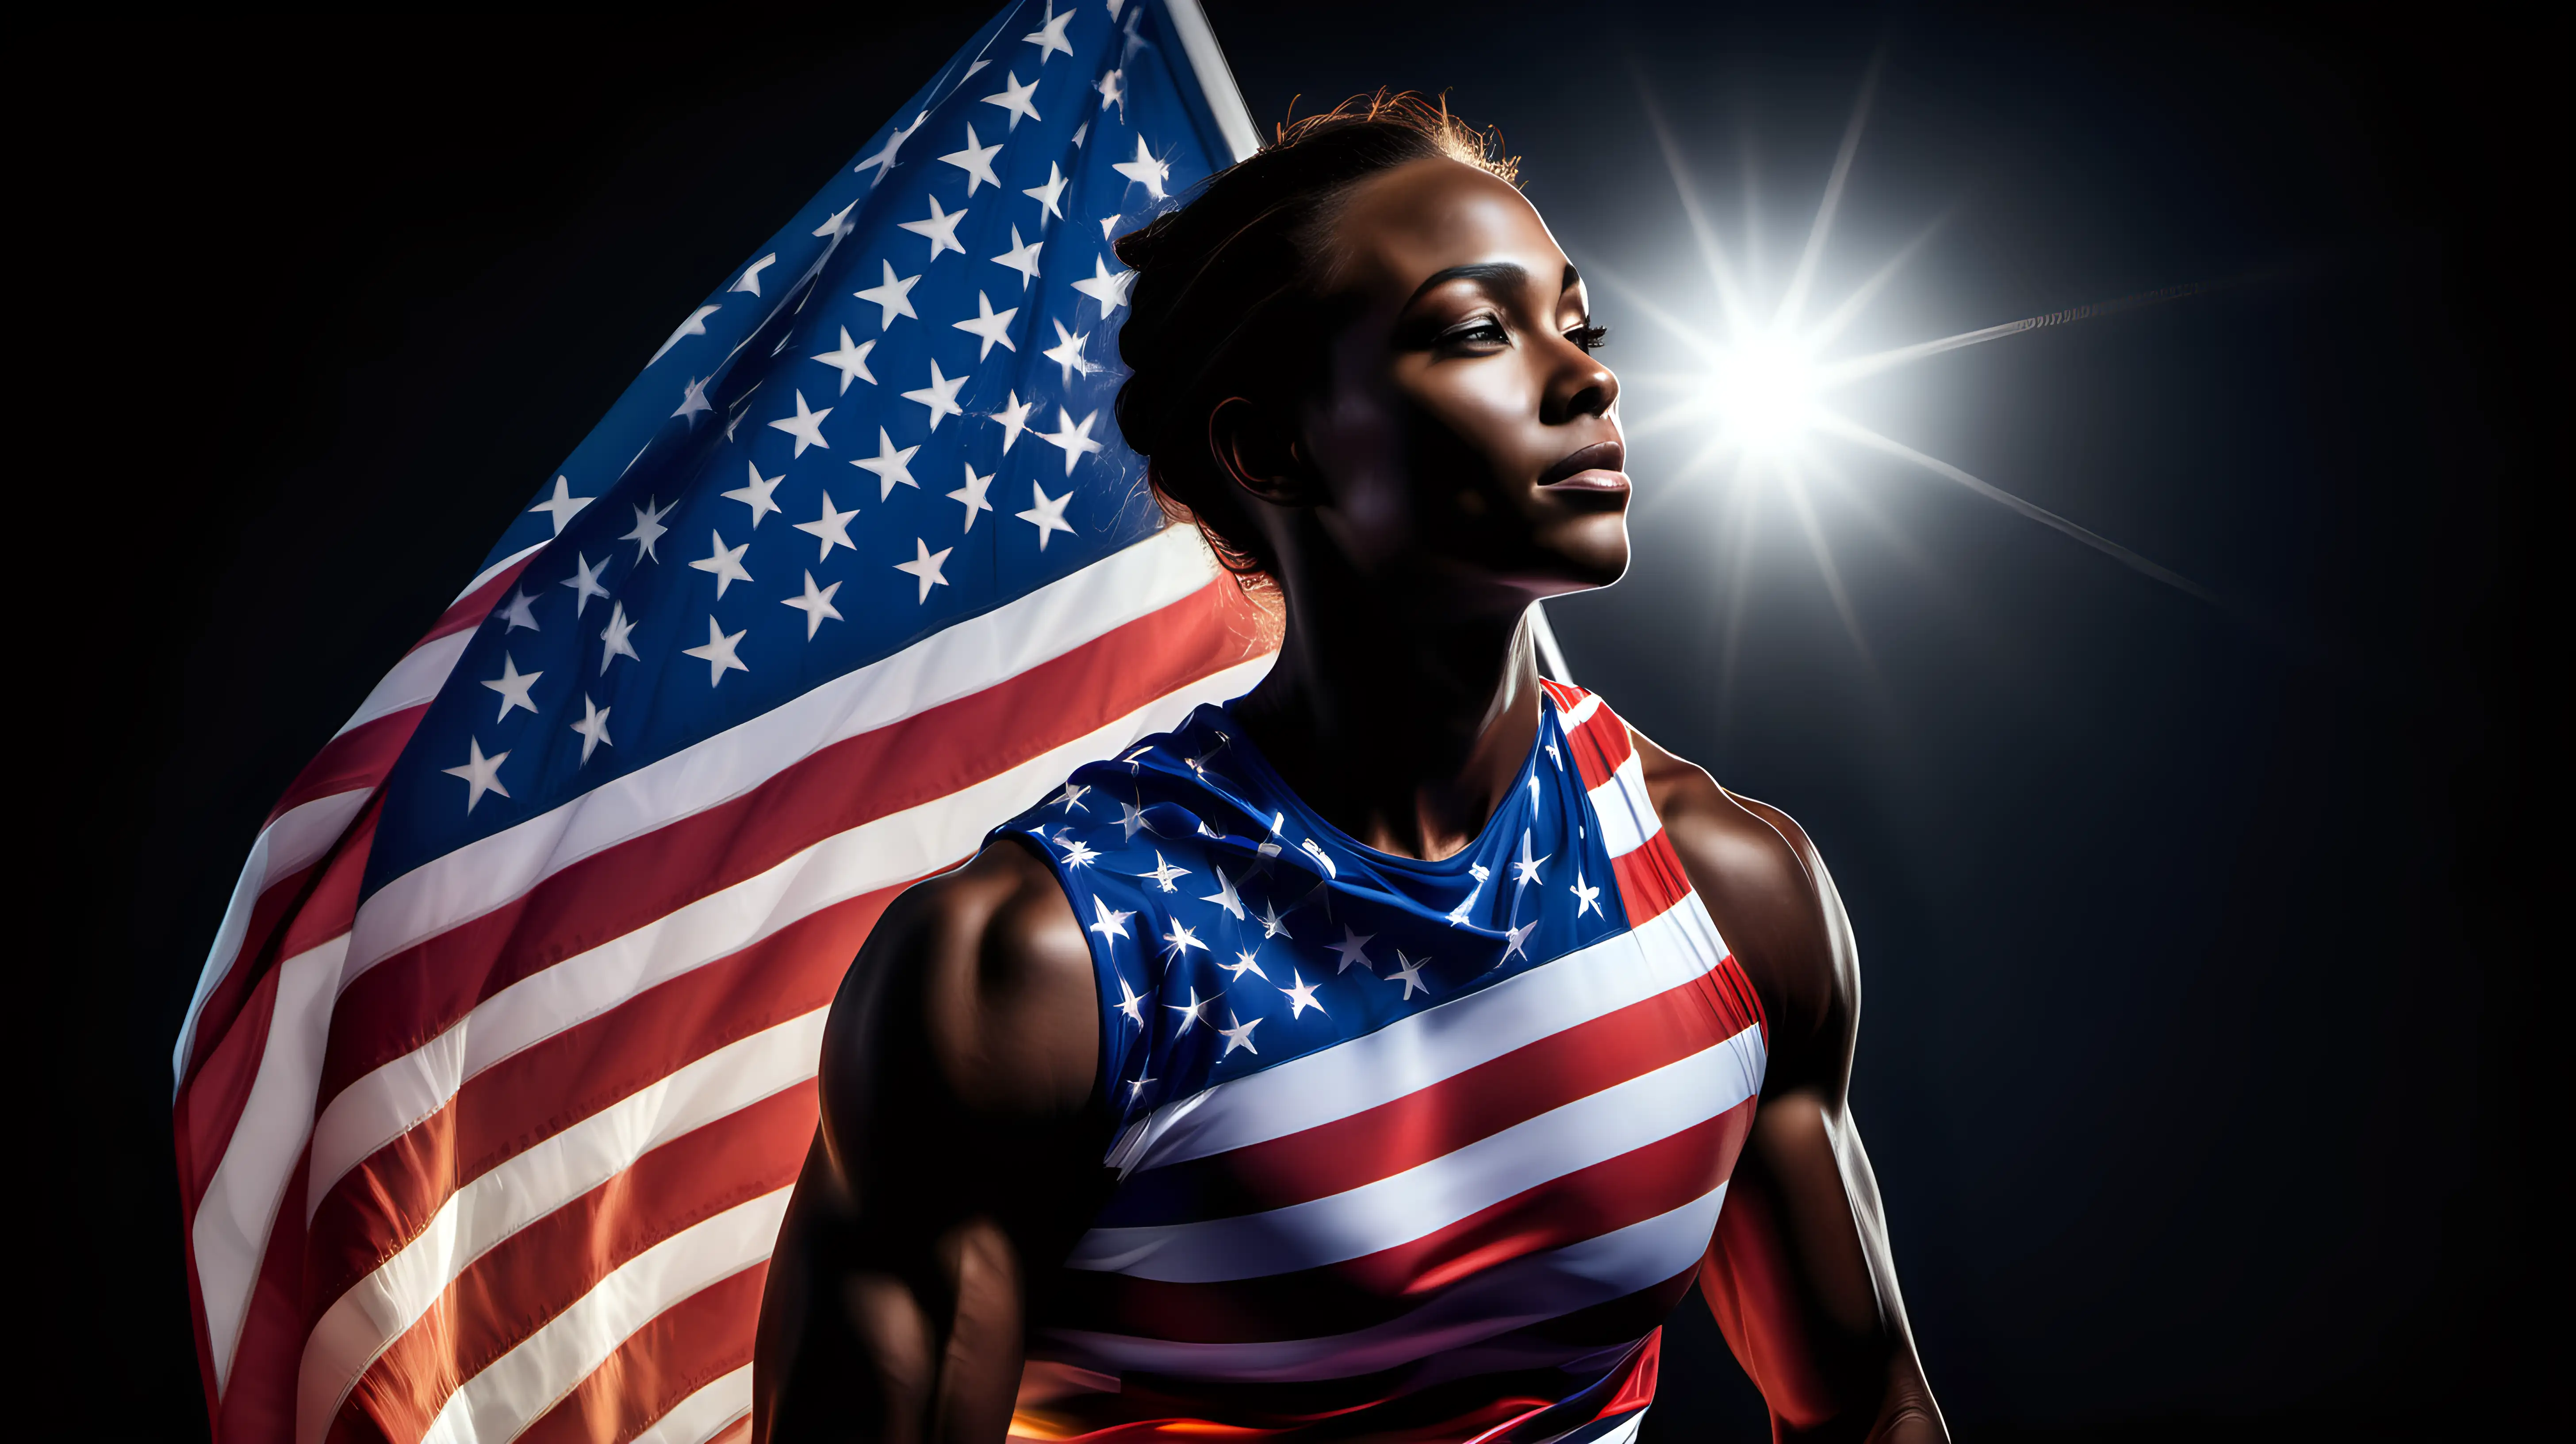 An athlete embracing a luminous American flag, the radiant glow highlighting their passion and dedication to representing their country on the world stage, even in the darkest of times.